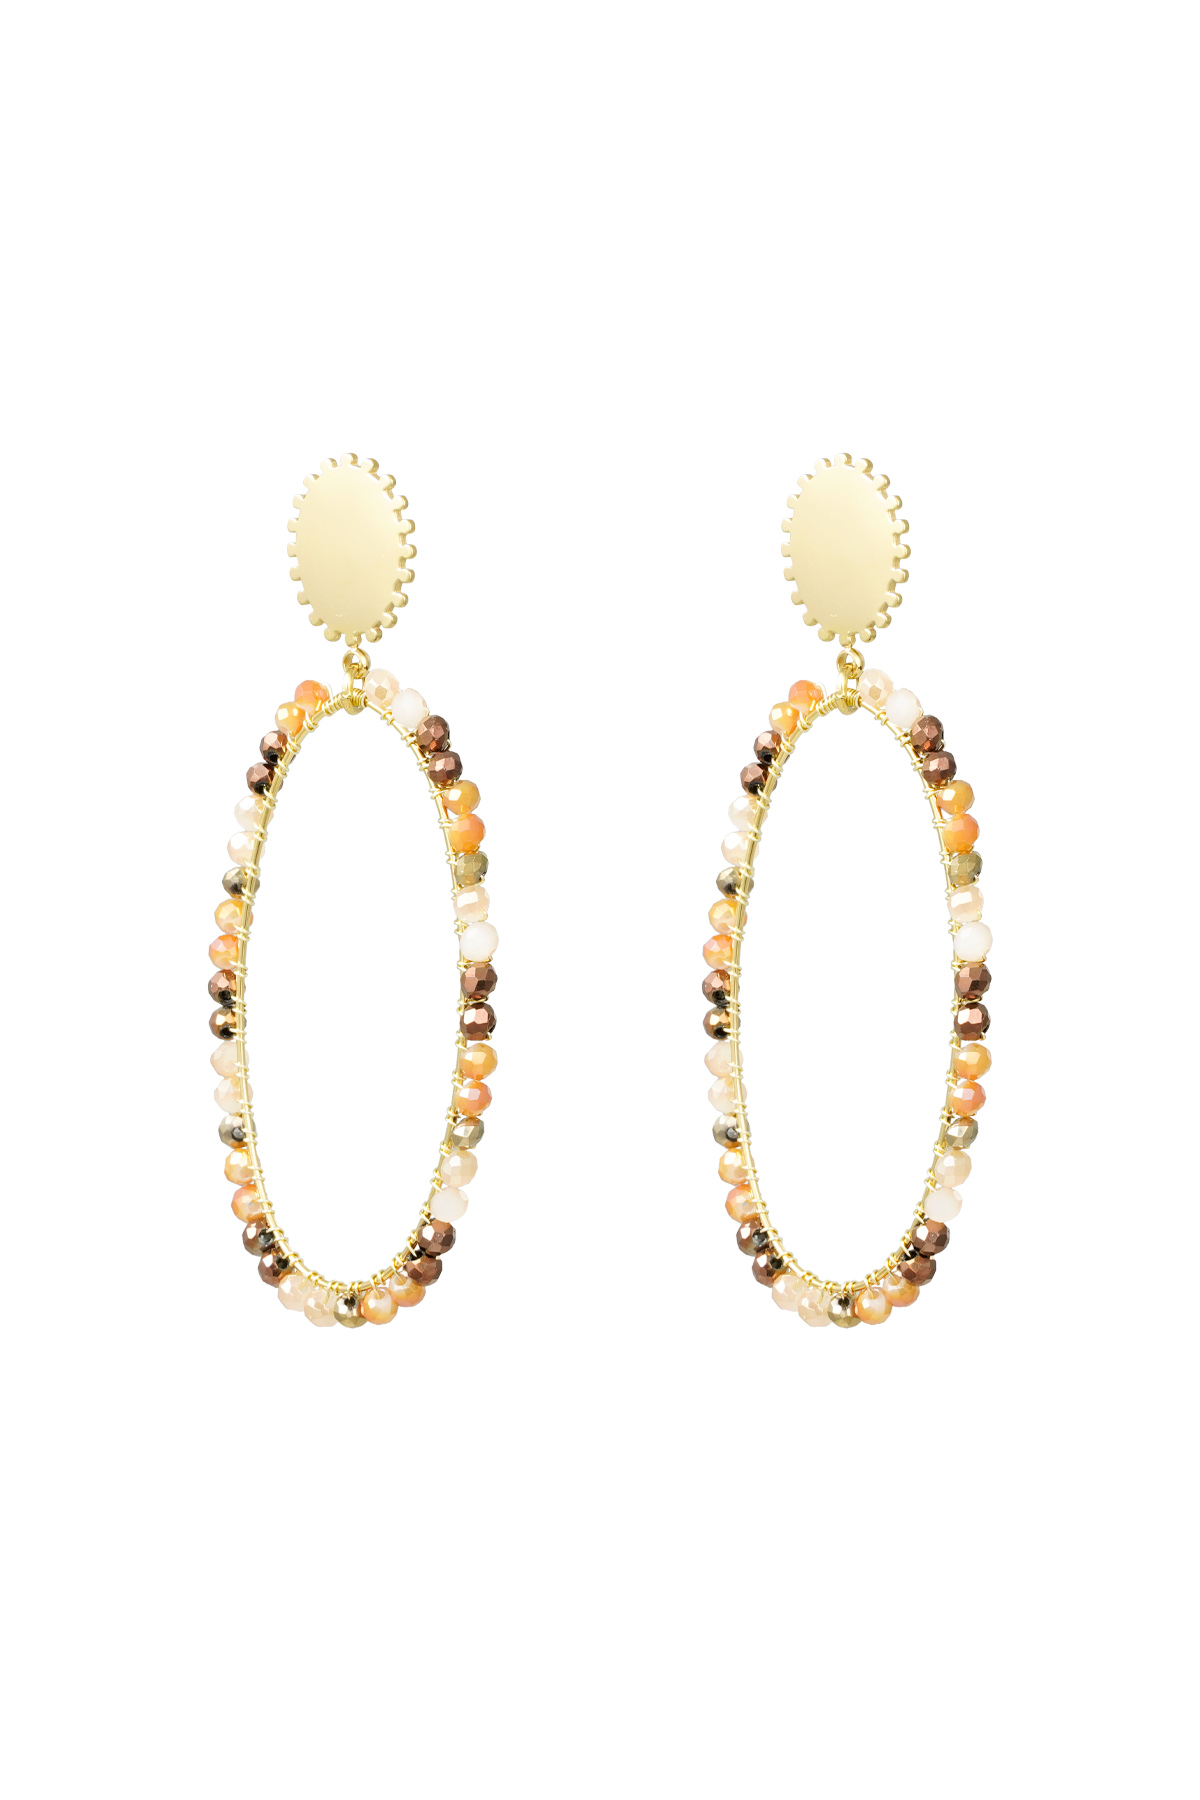 Elongated earrings with beads - gold/beige 